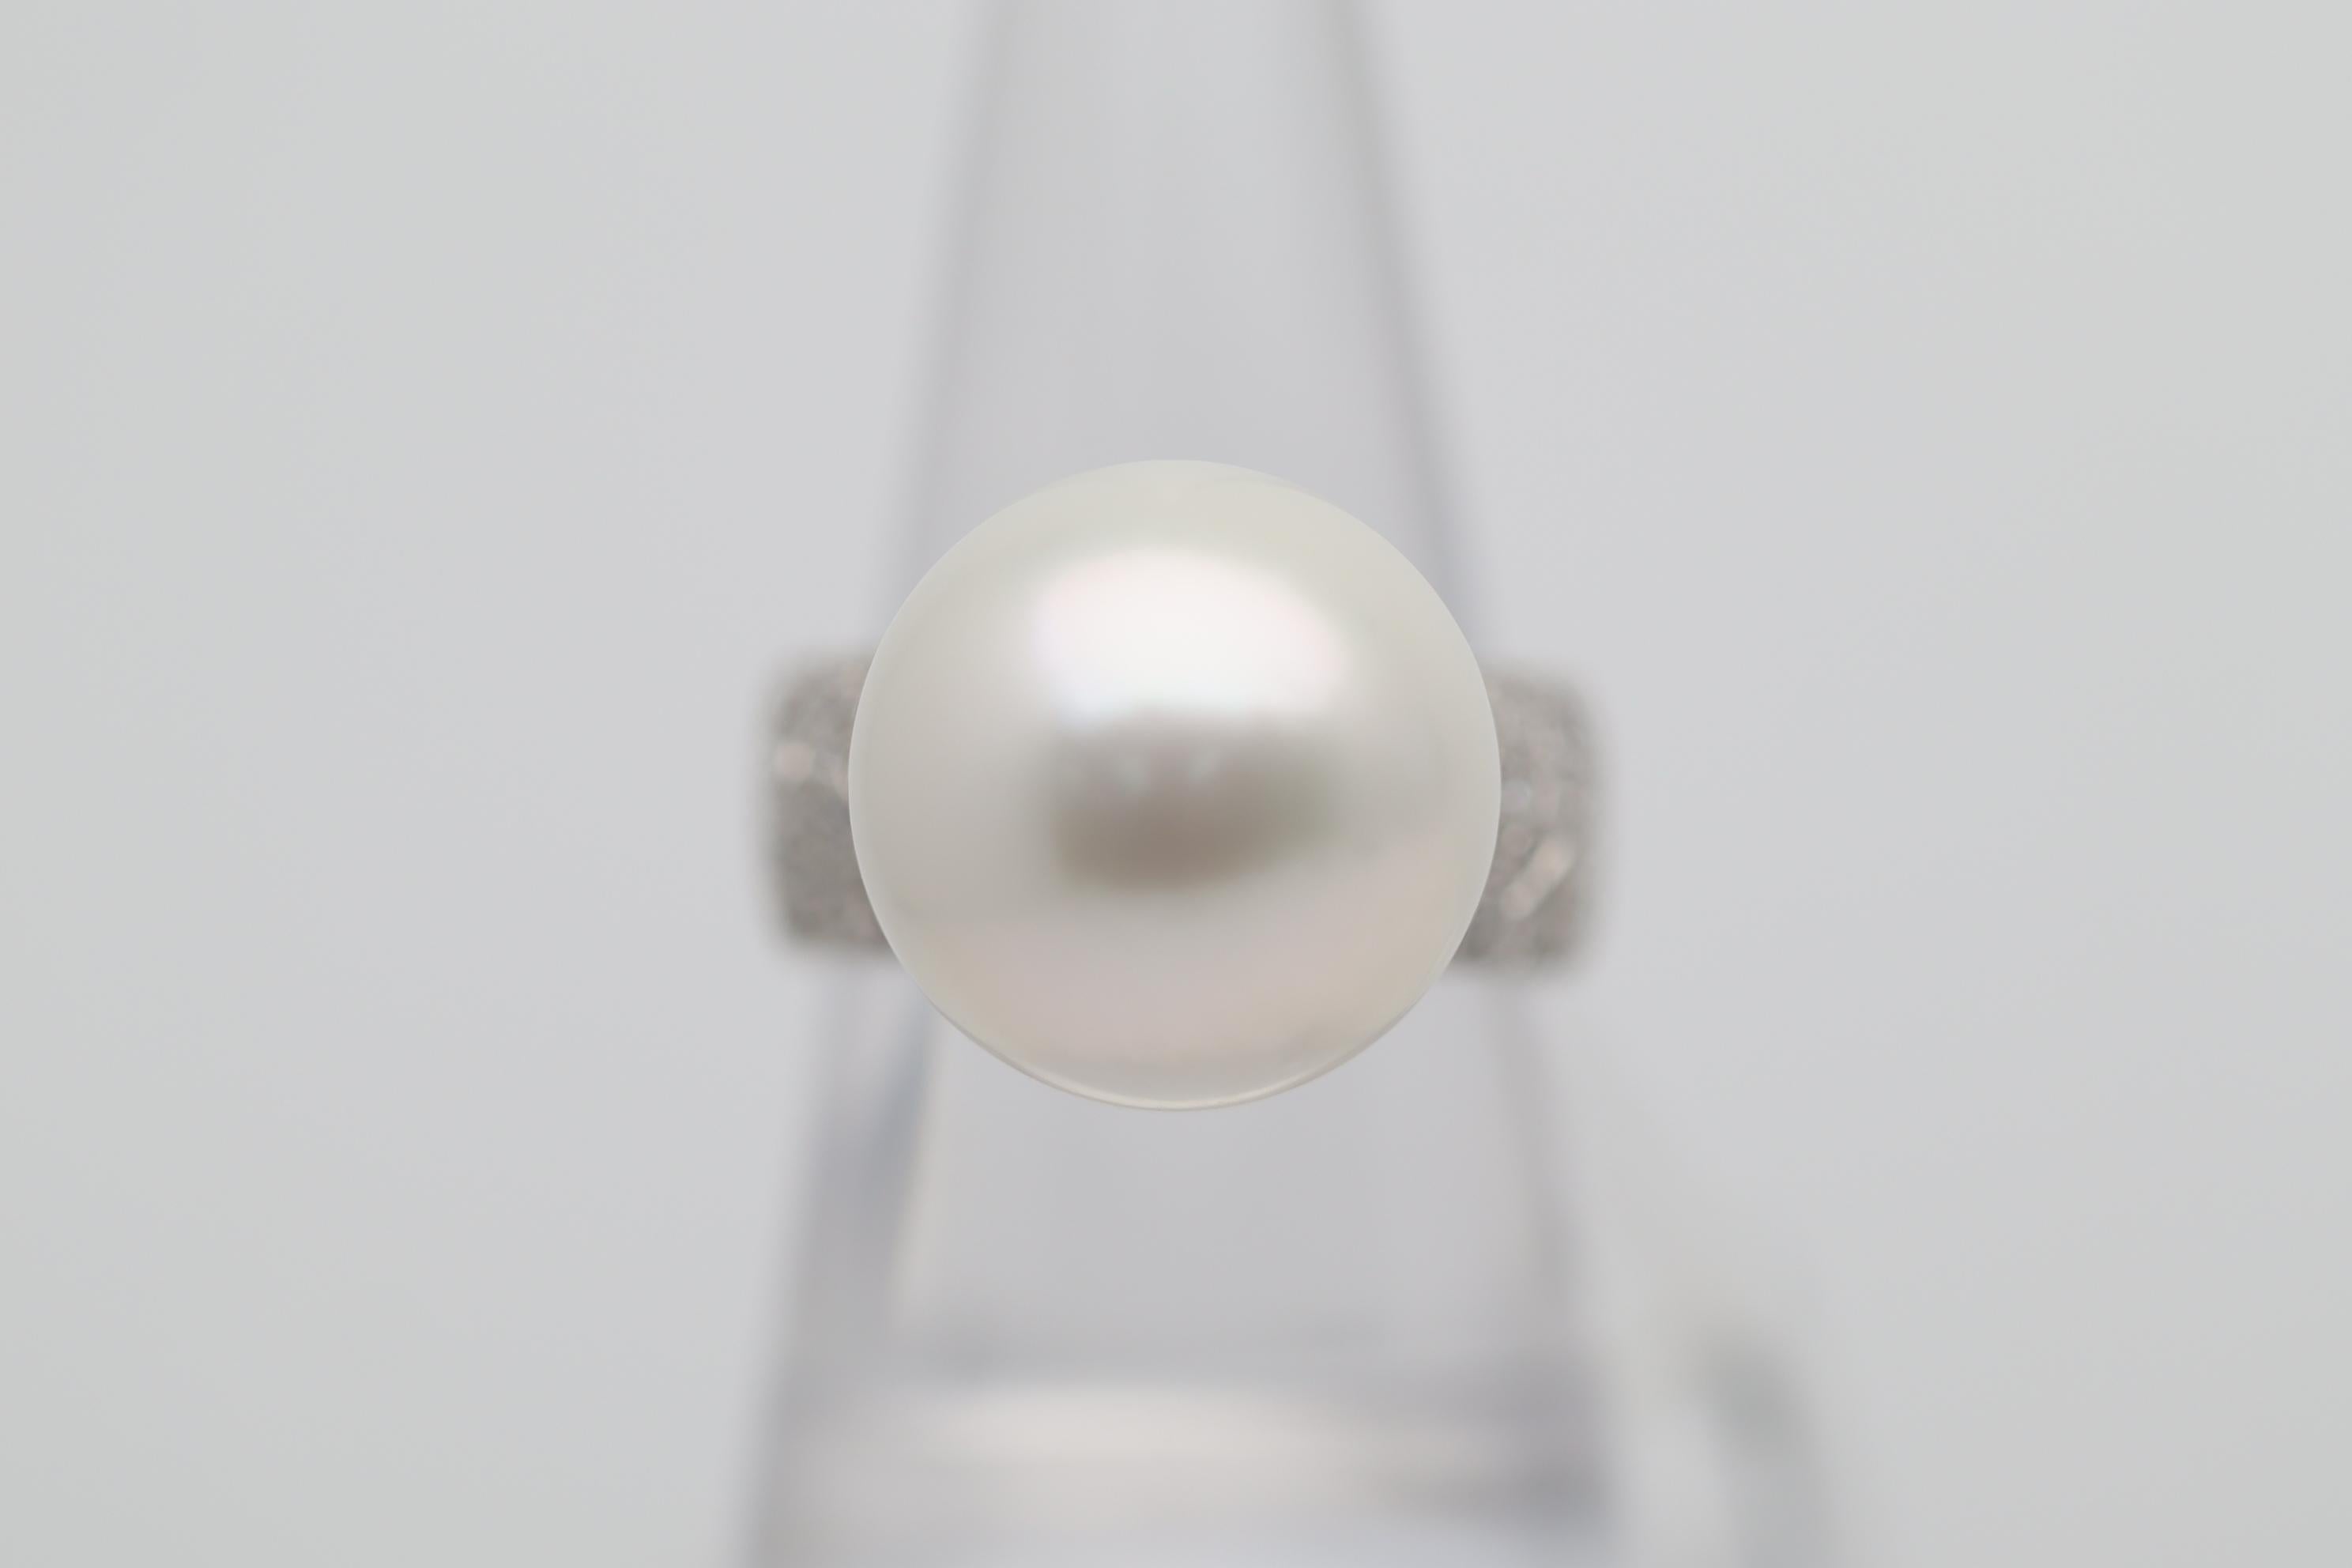 A large and impressive South Sea pearl measuring 16 millimeters in size! It has a perfectly round shape with great nacre quality and strong luster. It is complemented by 0.43 carats of round brilliant-cut diamonds set on the sides of the pearl with